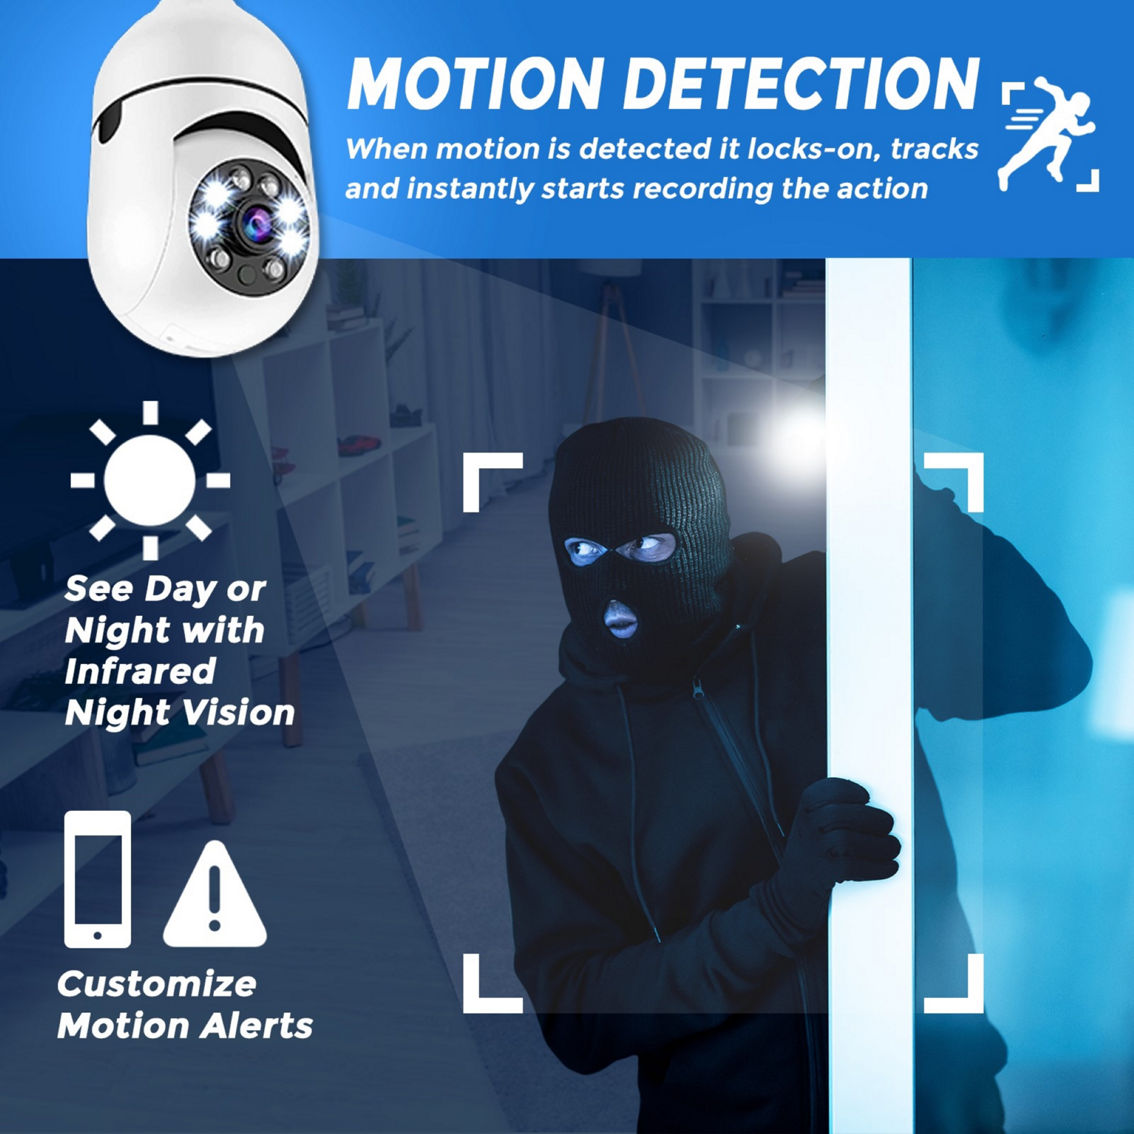 Trend Makers Sight Bulb WiFi Smart Camera Home Security System As Seen On TV - Image 4 of 7